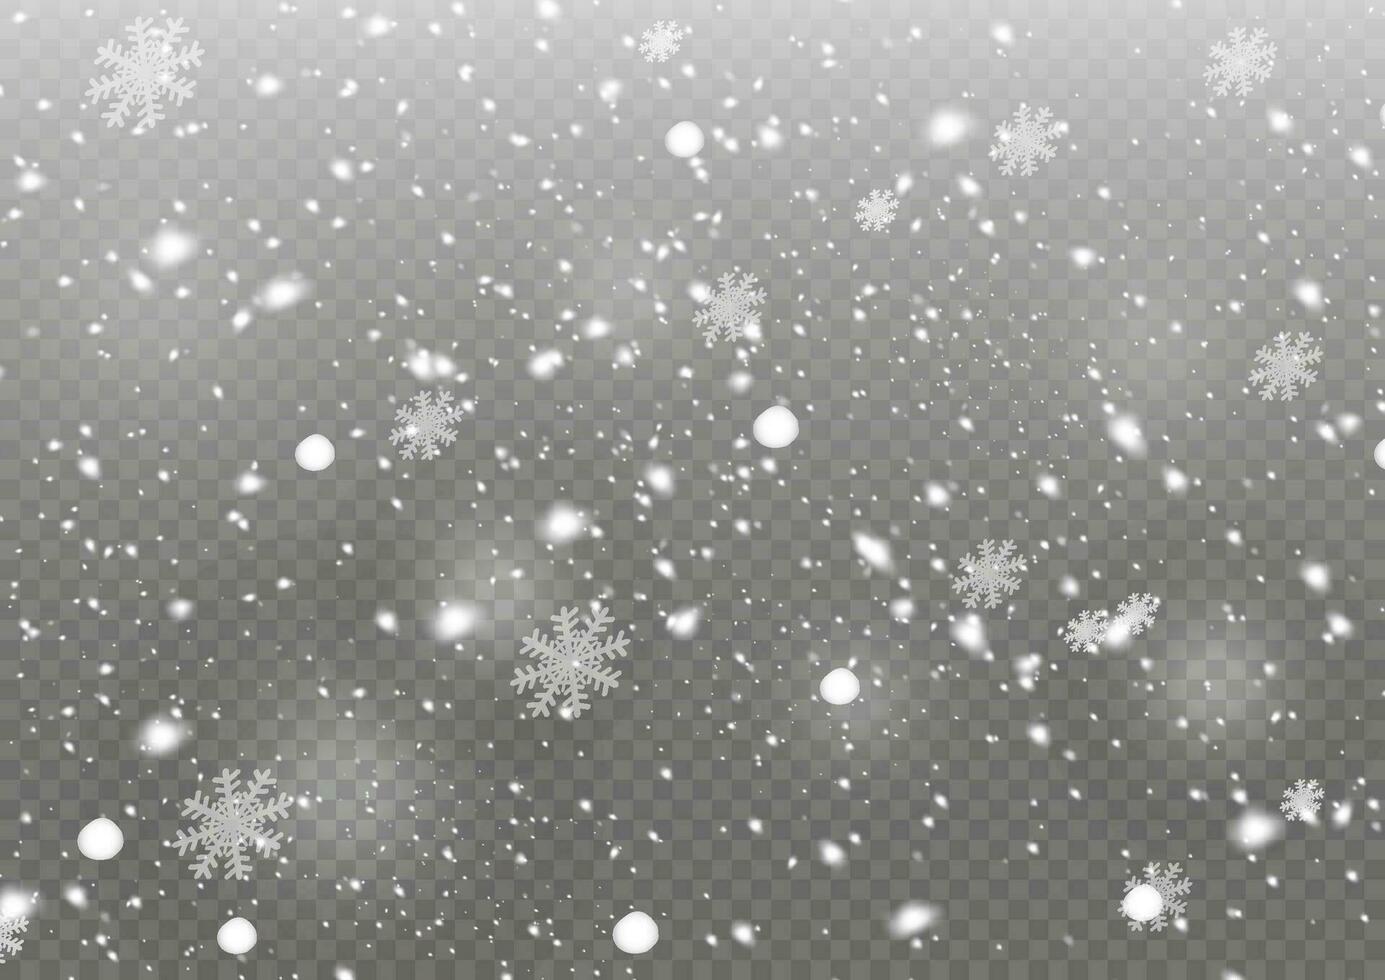 Falling snow with snowflakes and clouds. Mector illustration. Light, dust, winter, blizzard, christmas, vector. The effect of a frosty storm, snowfall, ice. Falling snow effect with snowflakes vector